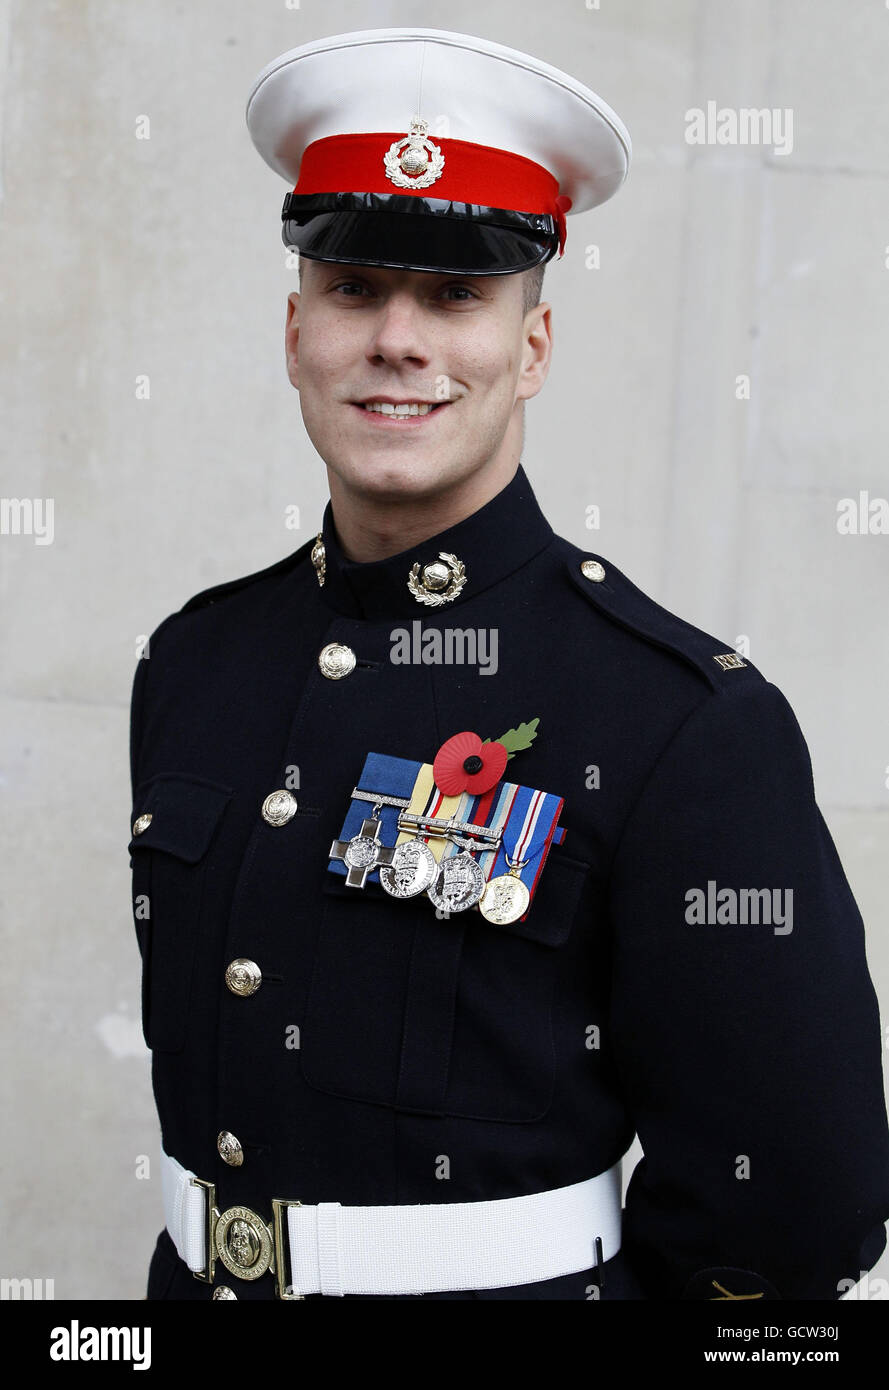 Lance Corporal Matt Croucher A George Cross Medal Holder Arrives For A Service For The Victoria Cross And George Cross Association Reunion At St Martin In The Fields In London Stock Photo Alamy